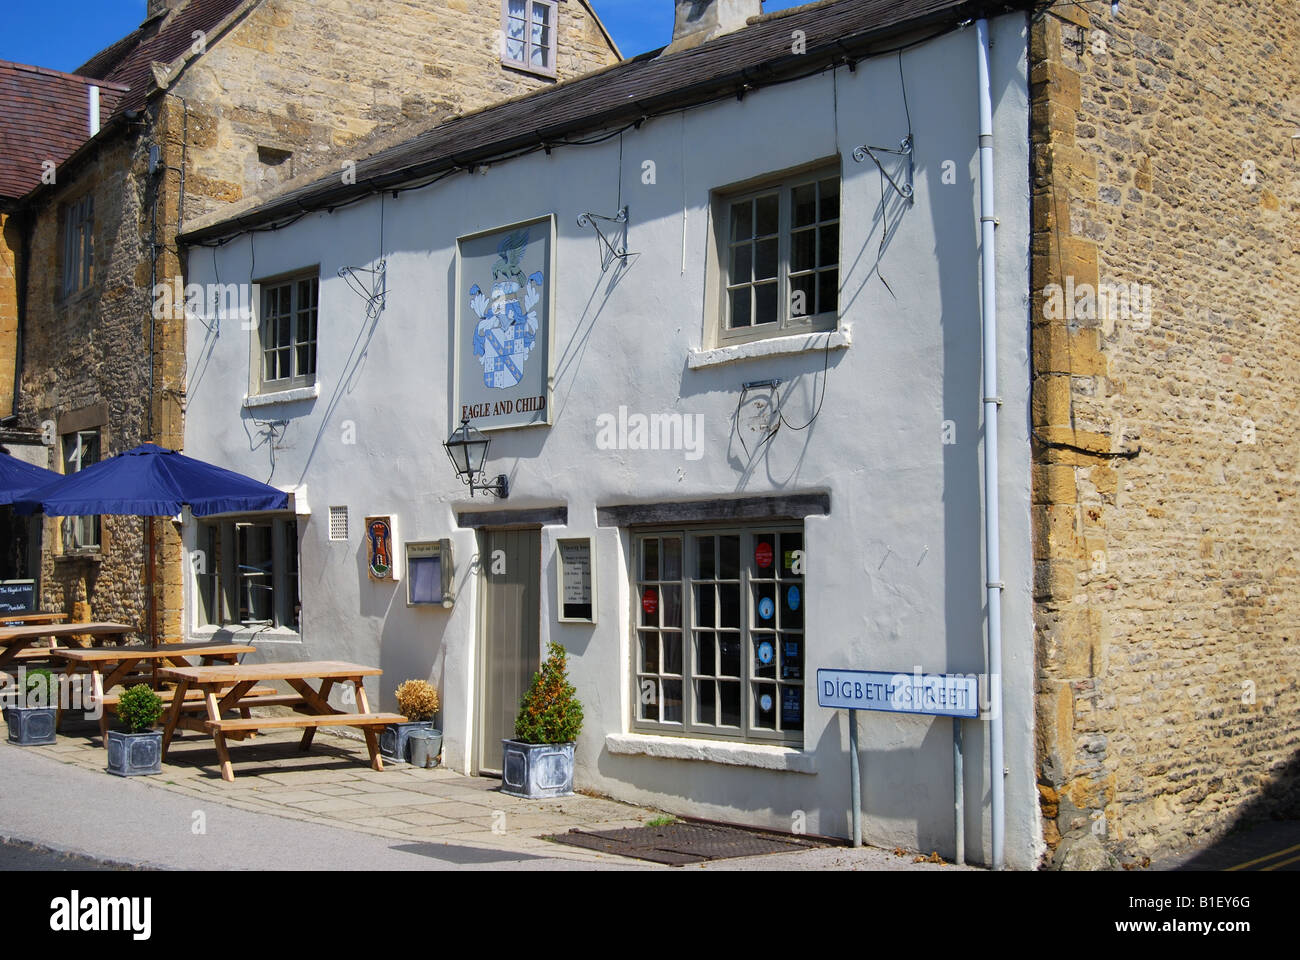 Eagle and Child Inn, Digbeth Street, Stow-on-the-Wold, Cotswolds, Gloucestershire, England, United Kingdom Stock Photo